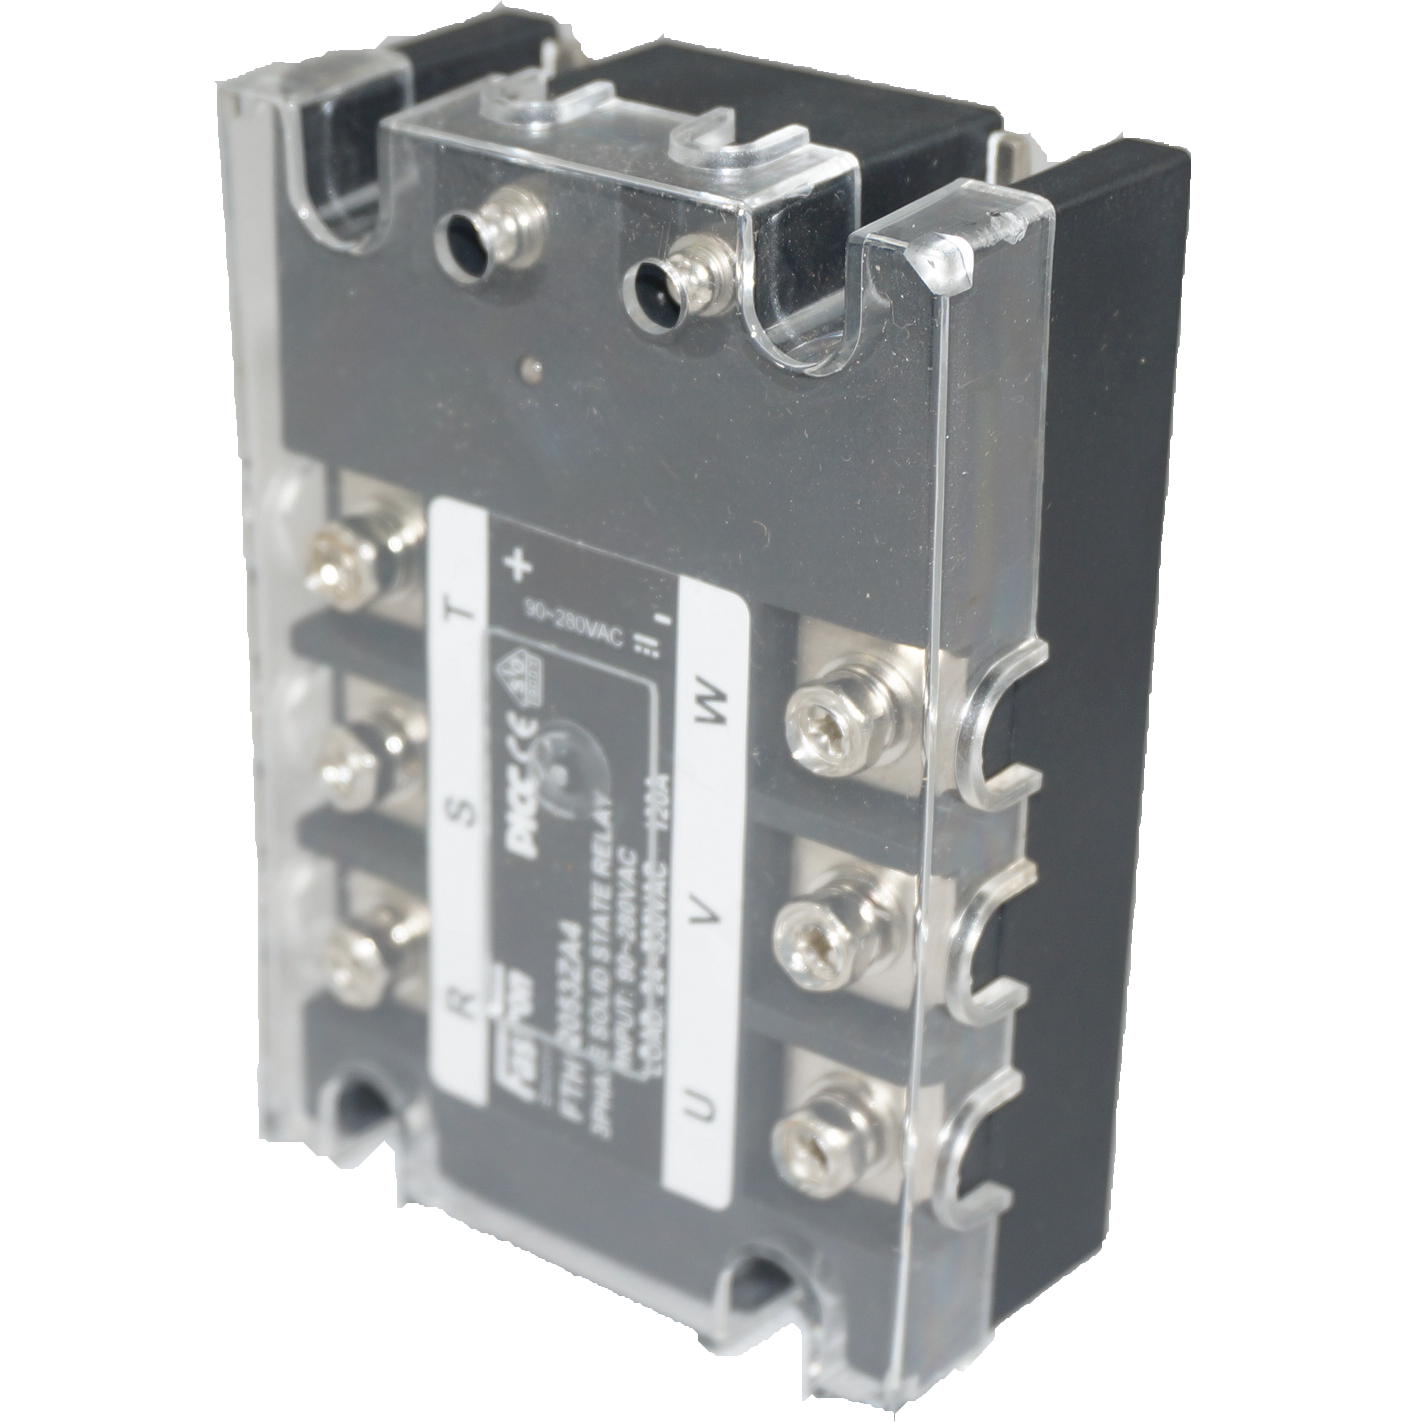 FTH12053ZD3, Solid State Relay, 3 Phase 4-32VDC Control, 120A, 70-530VAC Load, with IP20 Cover